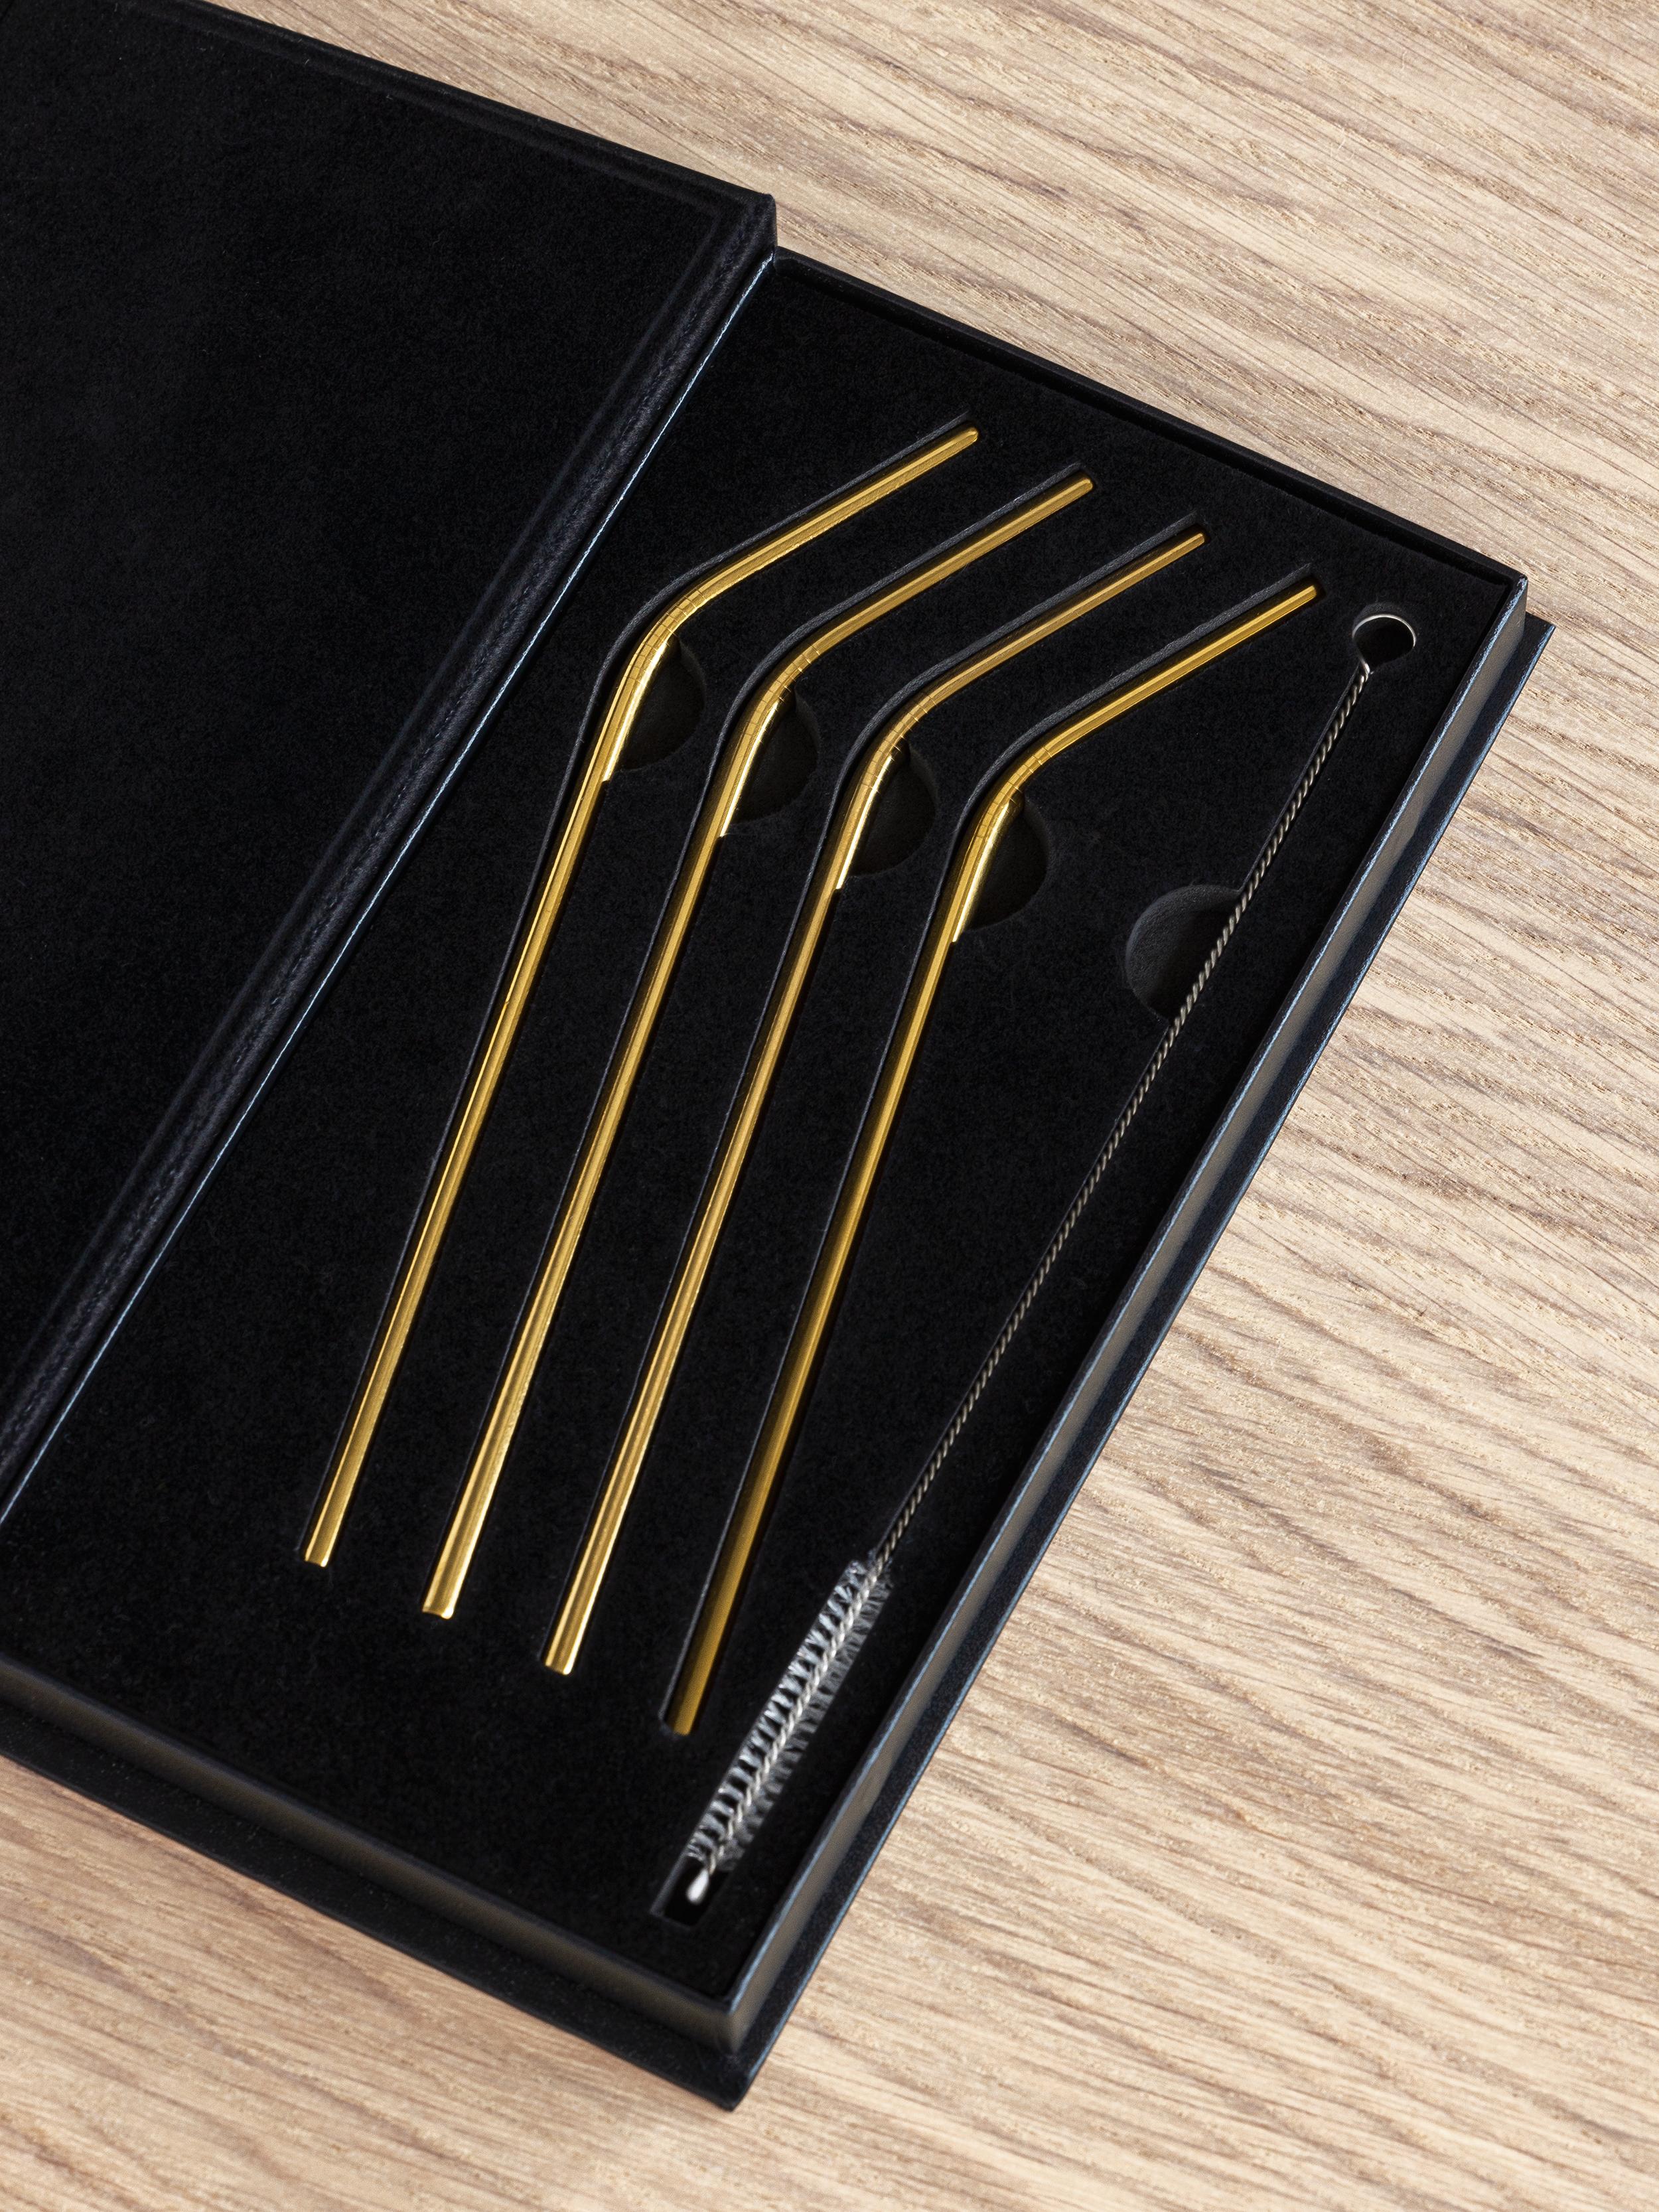 Peak Cocktail Straws from Orrefors, available as a - SET OF 4, are made of stainless steel with a titanium-treated surface. The set includes a cleaning brush.
